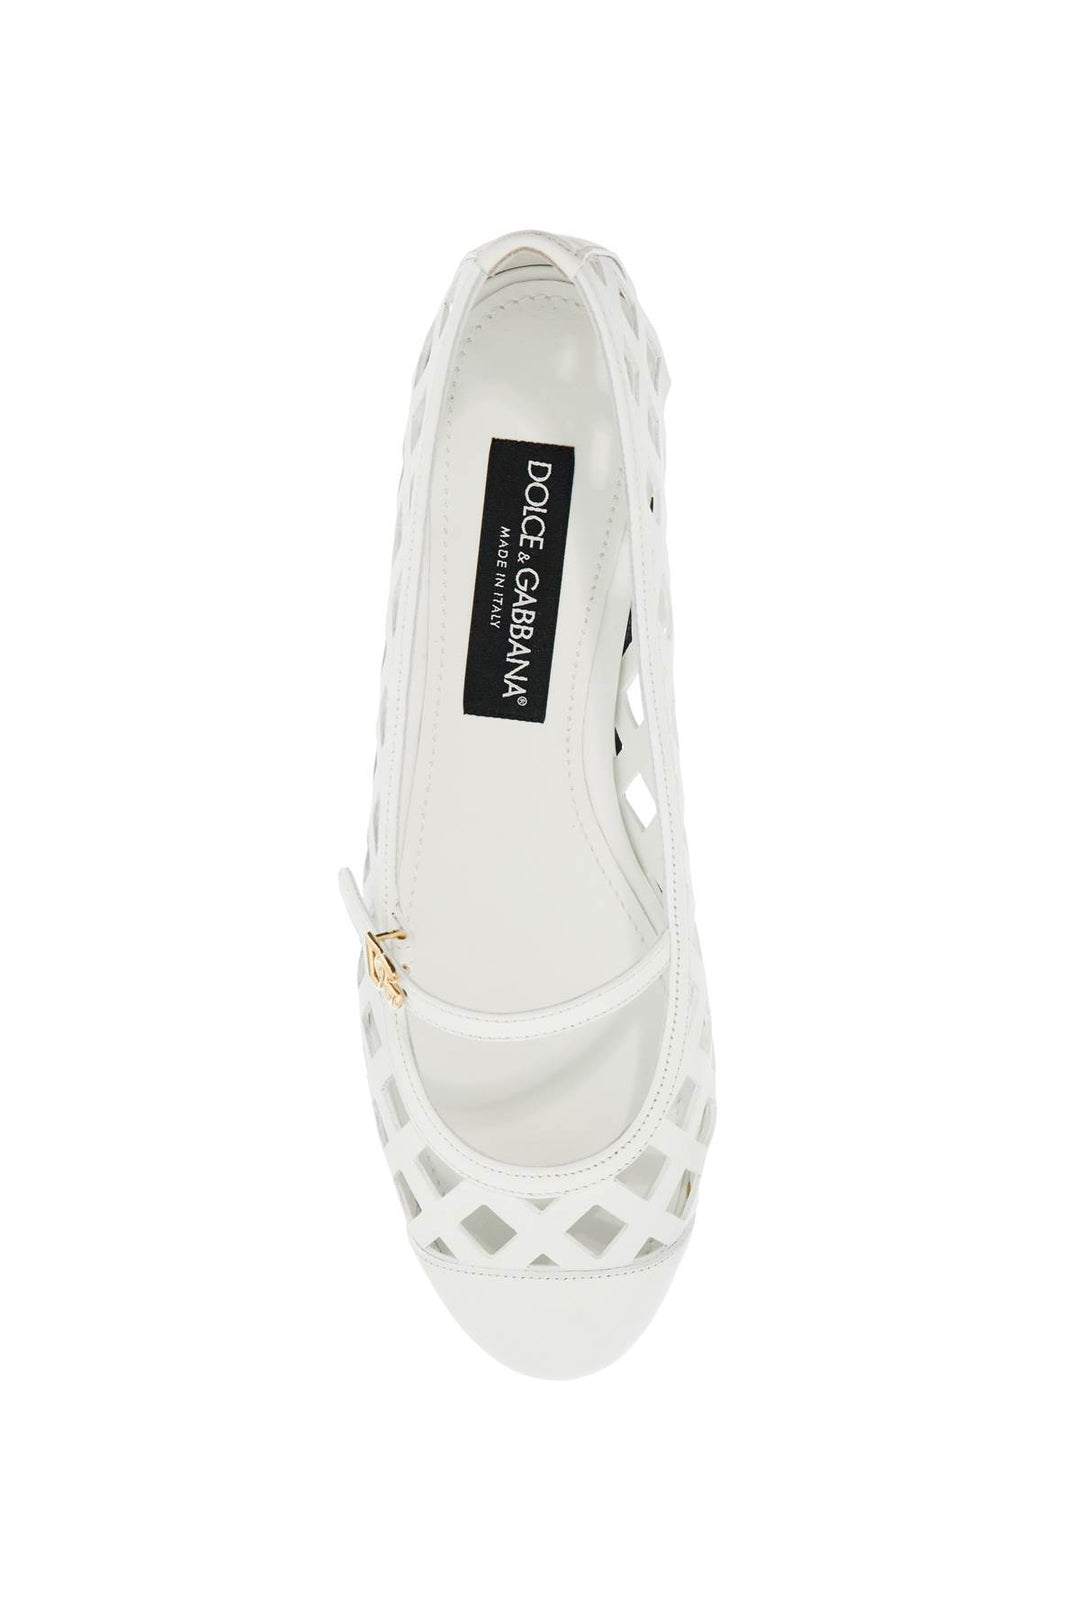 Dolce & Gabbana Perforated Leather Odette   White